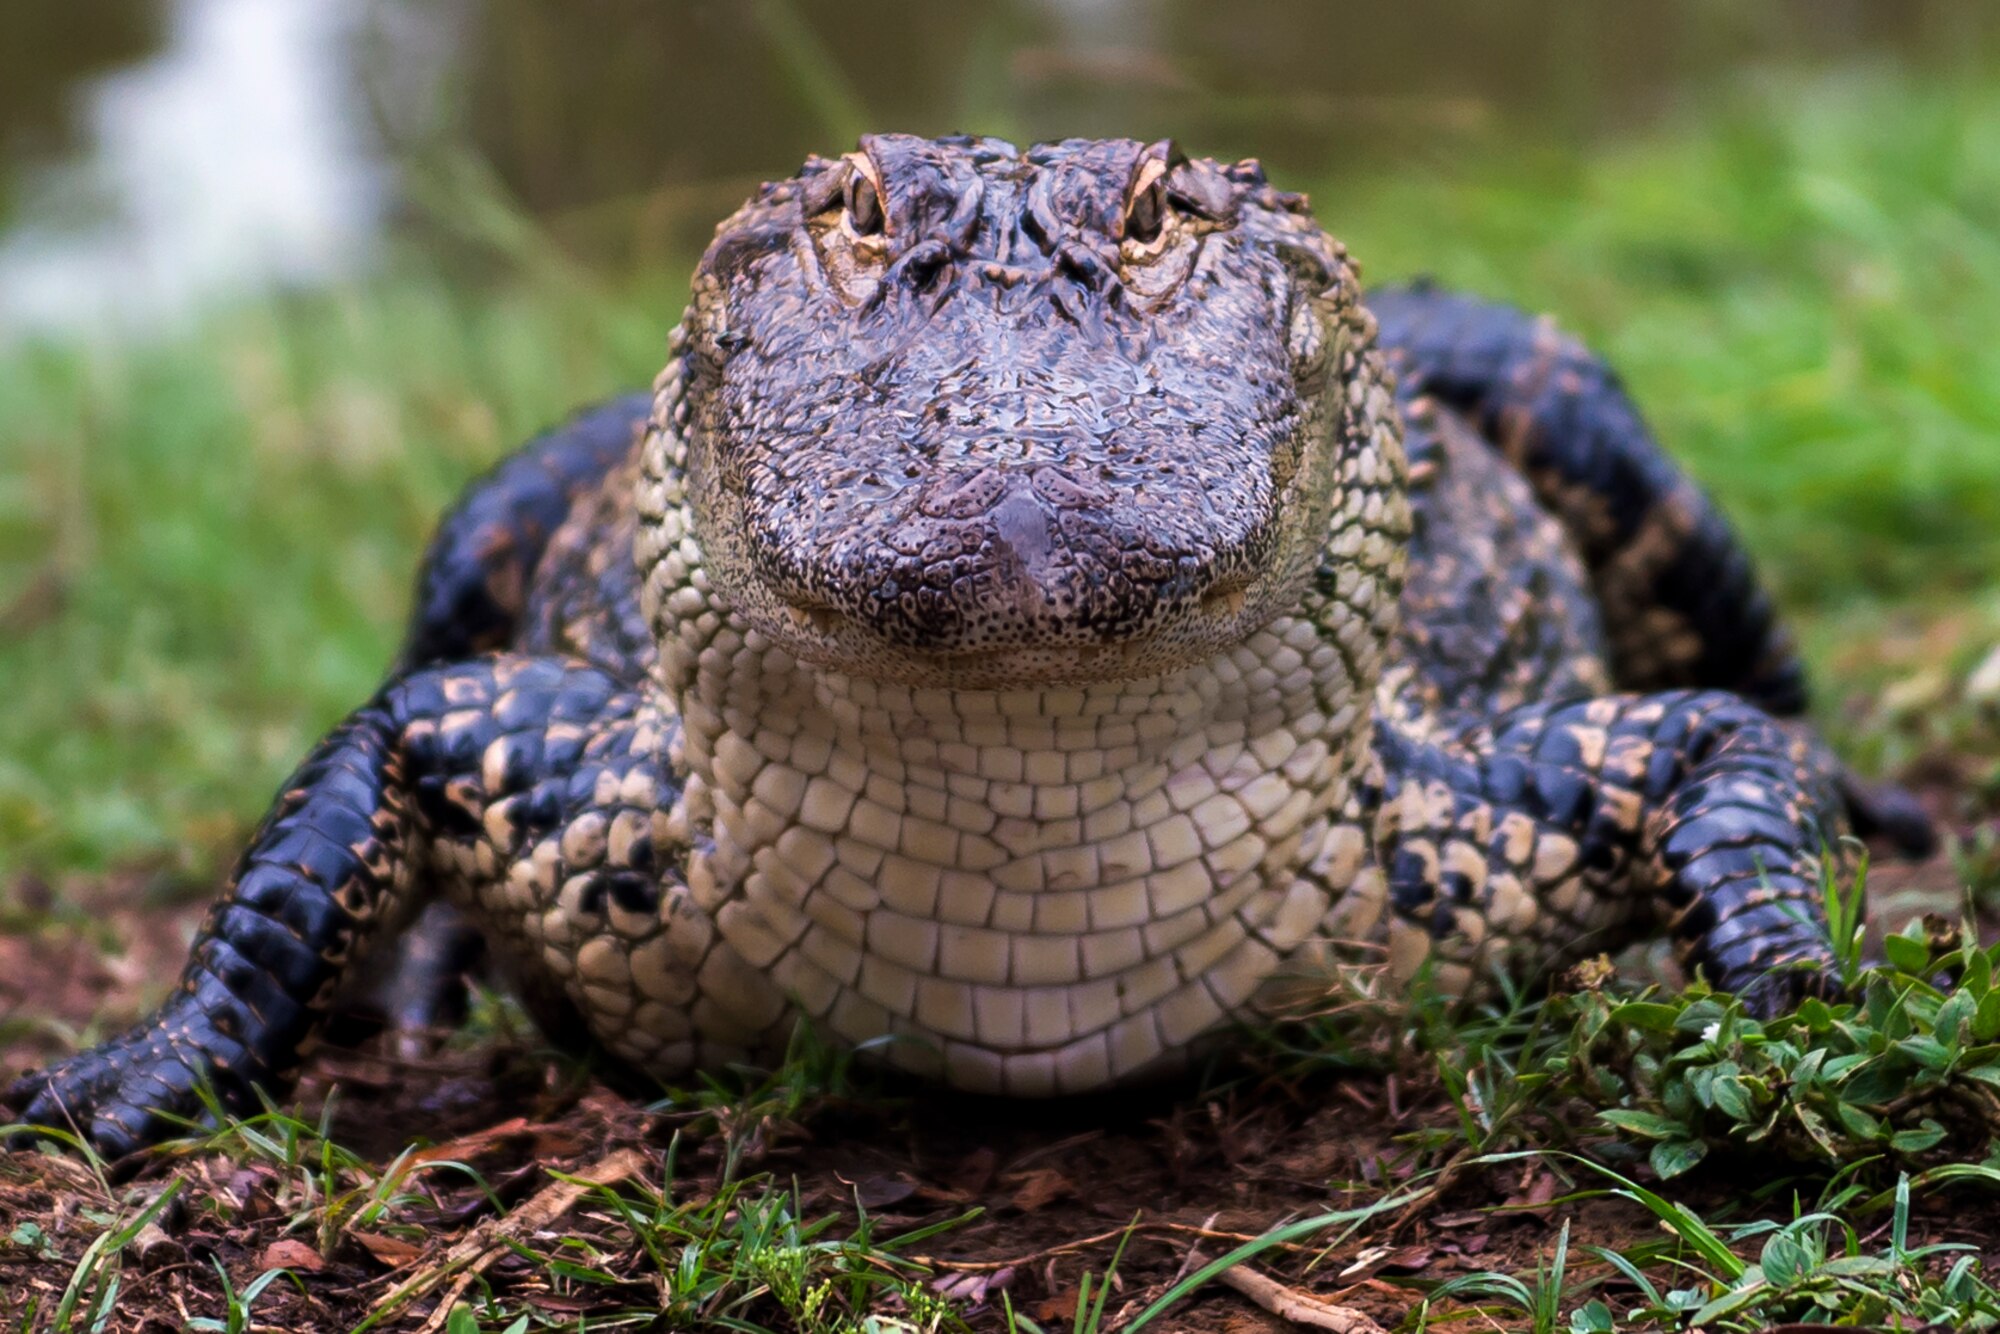 One of Charlie’s offspring smiles at the camera June 29, 2016 at Joint Base Charleston – Weapons Station. Charlie, a captive alligator weighing an estimated 600 pounds is more than 12 feet long and has been a military resident since the early 1960’s (U.S. Air Force photo/Staff Sgt. Jared Trimarchi) 